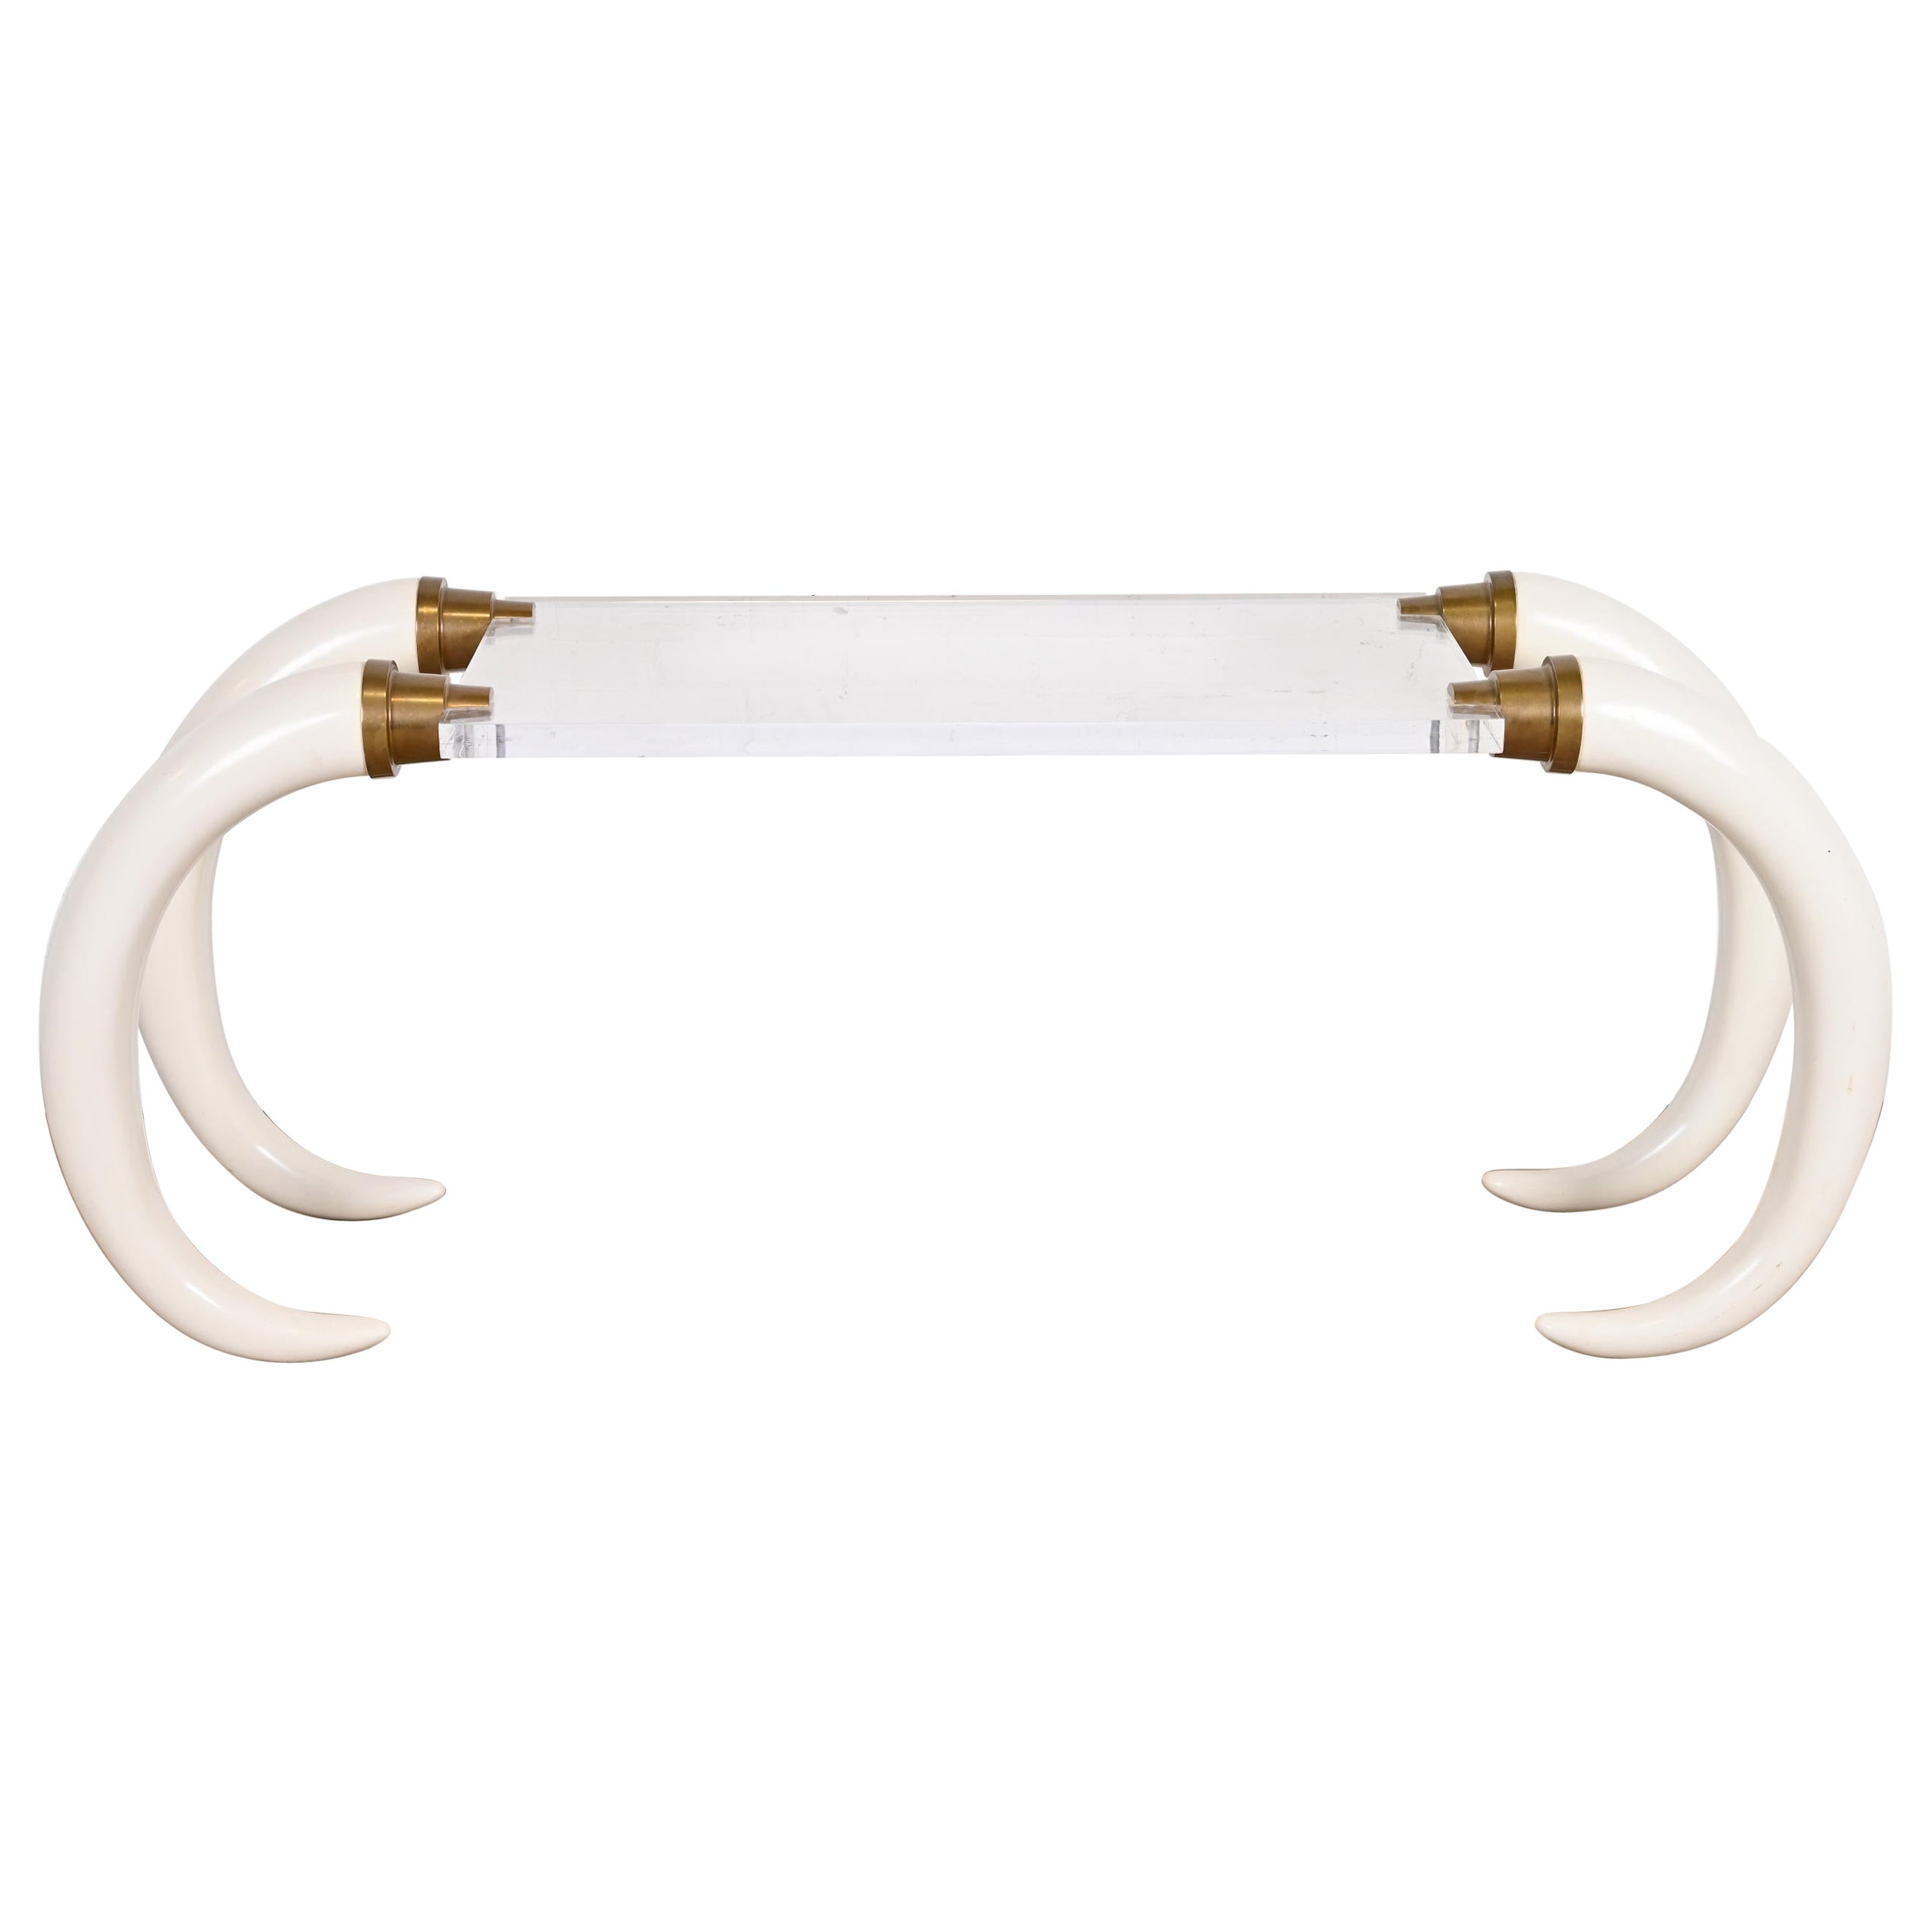 Modern Elephant Tusk Console Table by Suzzane Dahl & Jerry Barich, 1970s